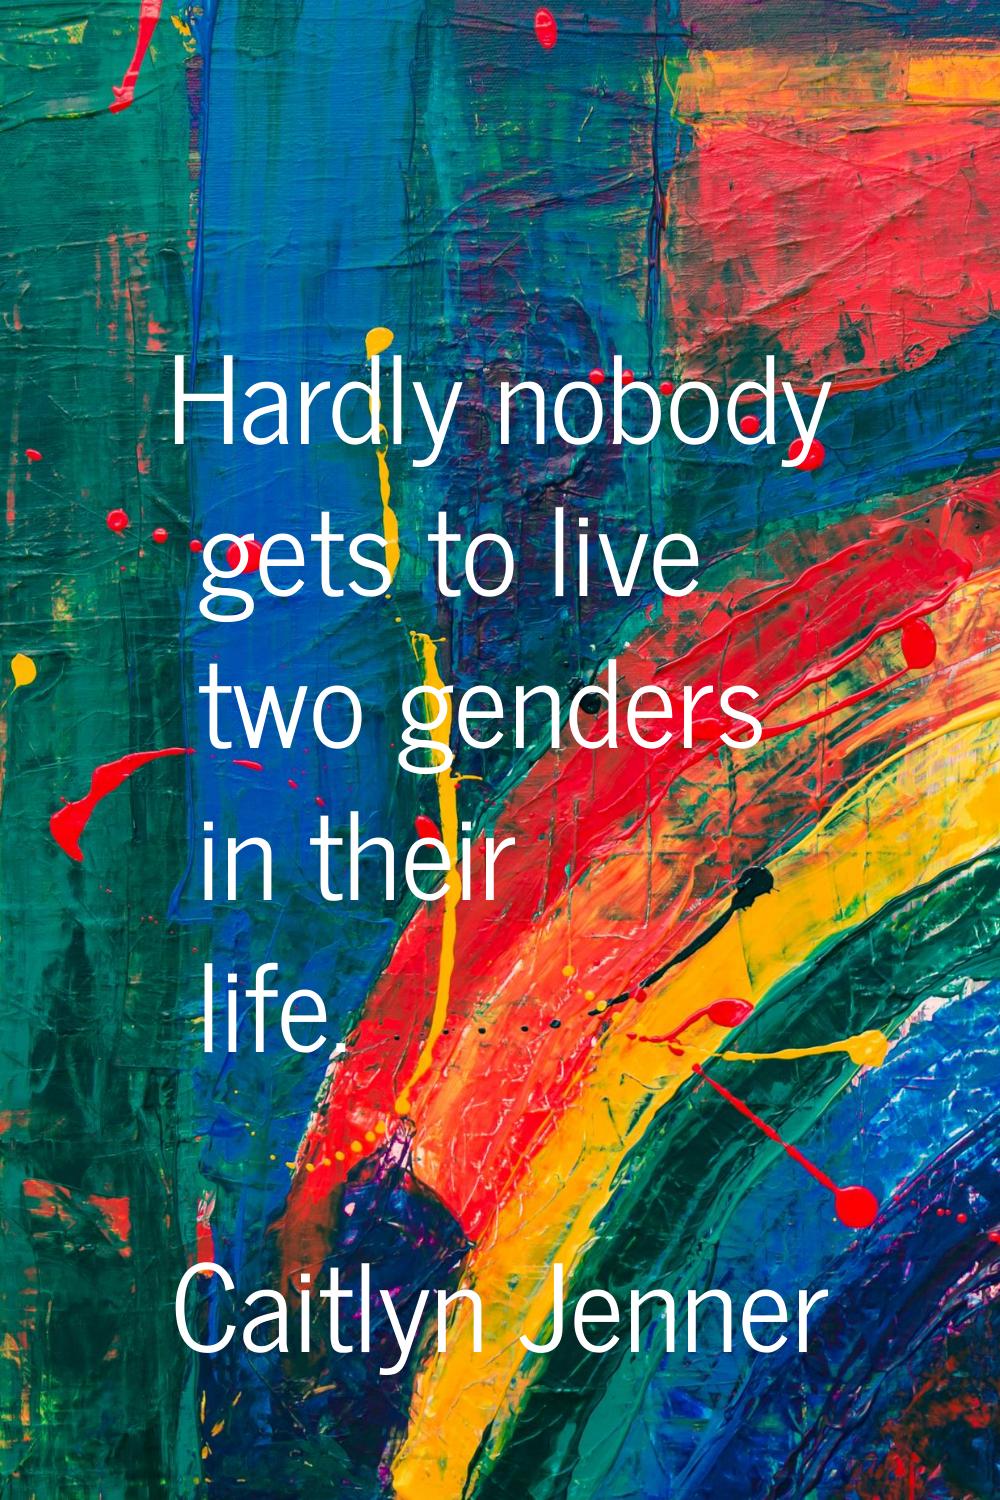 Hardly nobody gets to live two genders in their life.